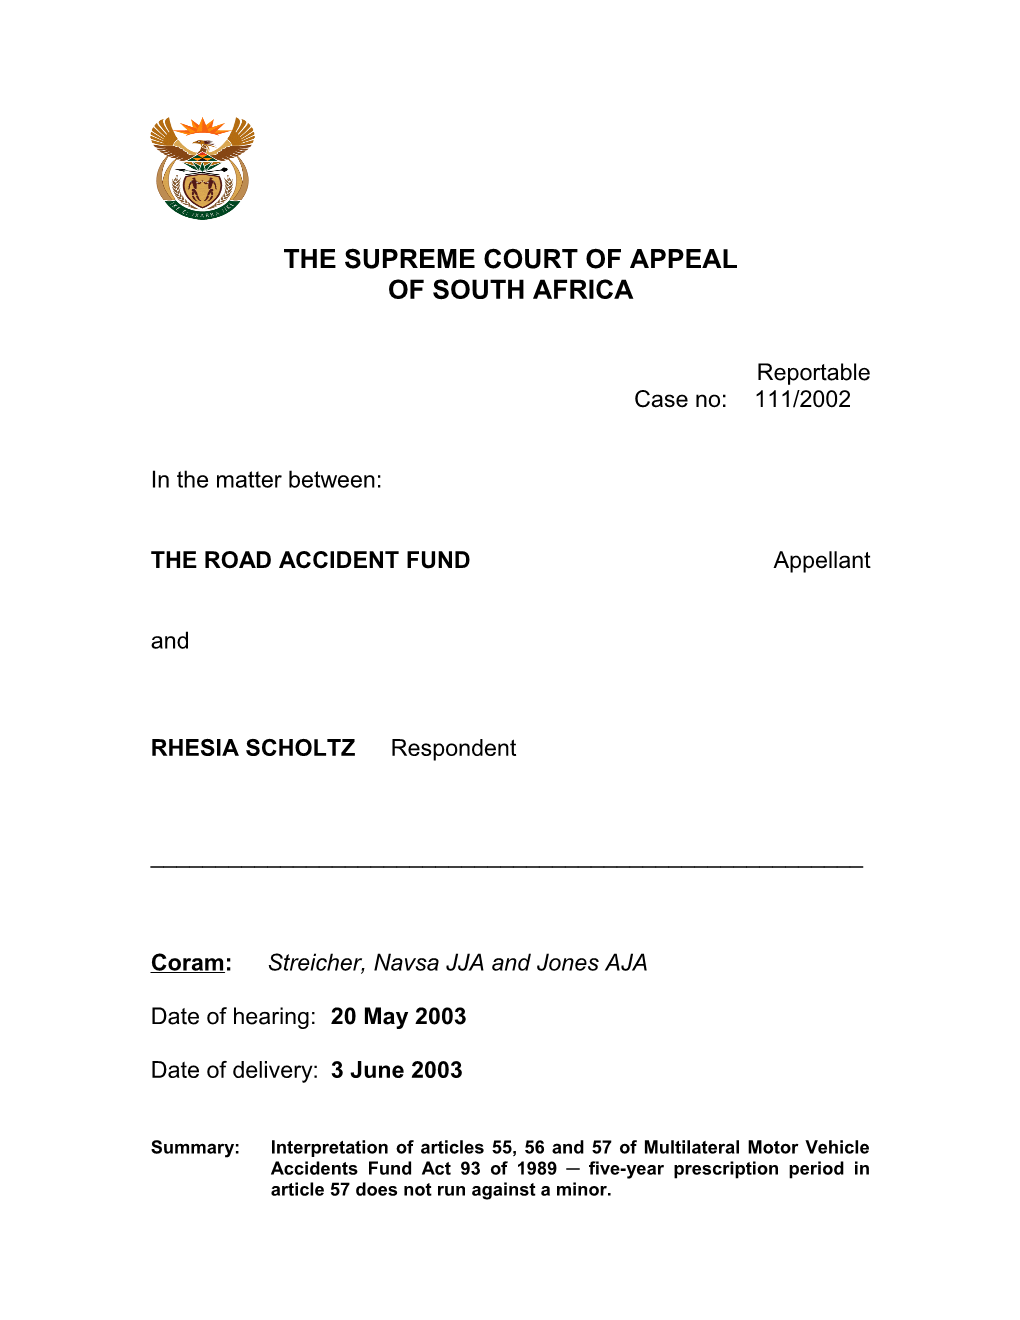 The Supreme Court of Appeal s10